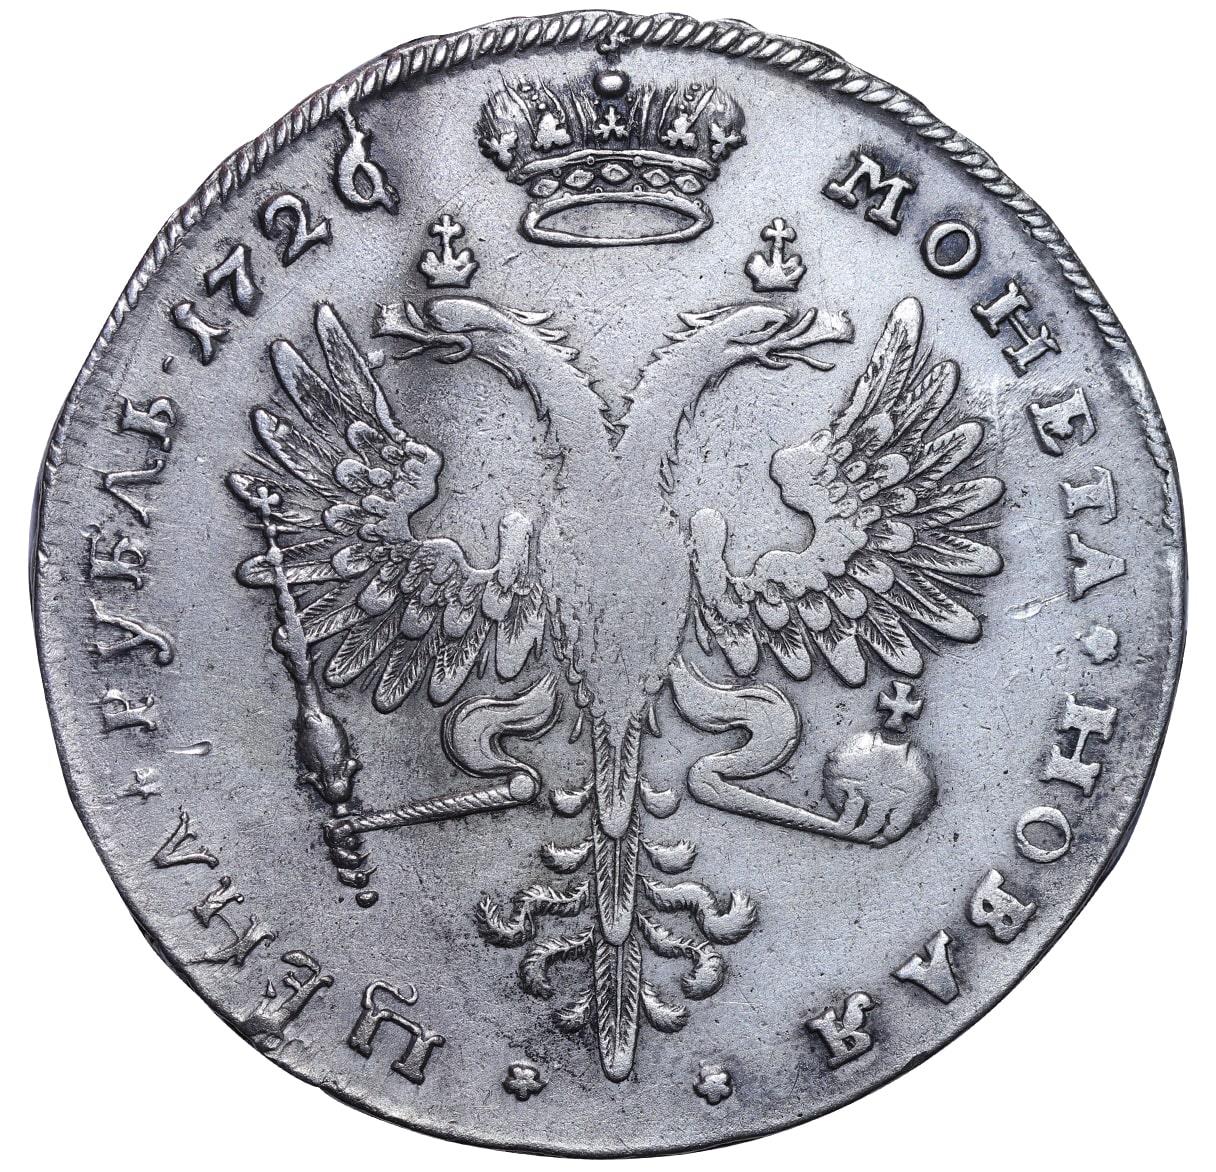 Russian Empire, 1 Rouble, 1726 year - Image 3 of 3